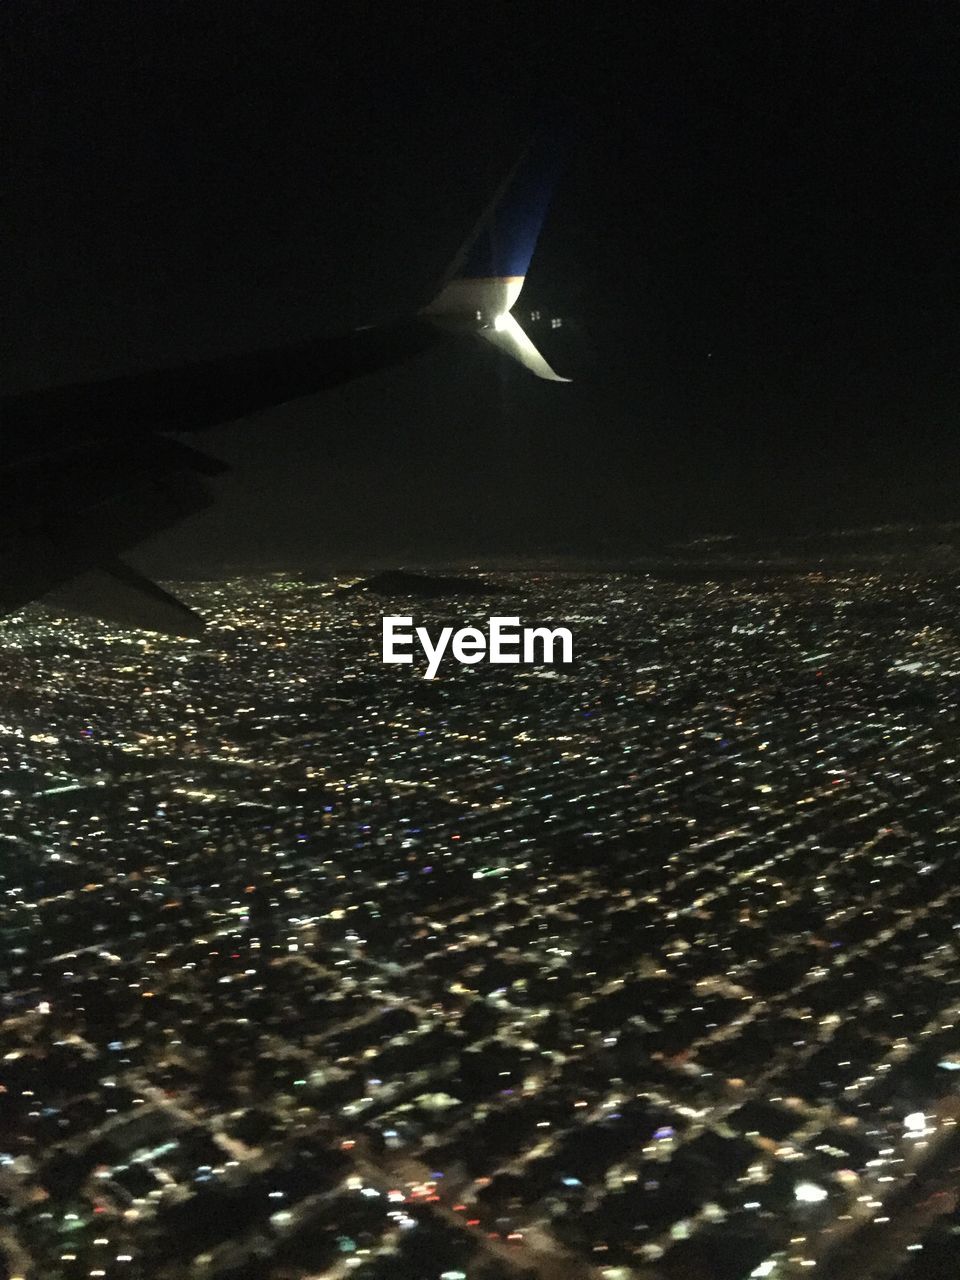 AERIAL VIEW OF ILLUMINATED CITYSCAPE SEEN THROUGH AIRPLANE WINDOW AT NIGHT